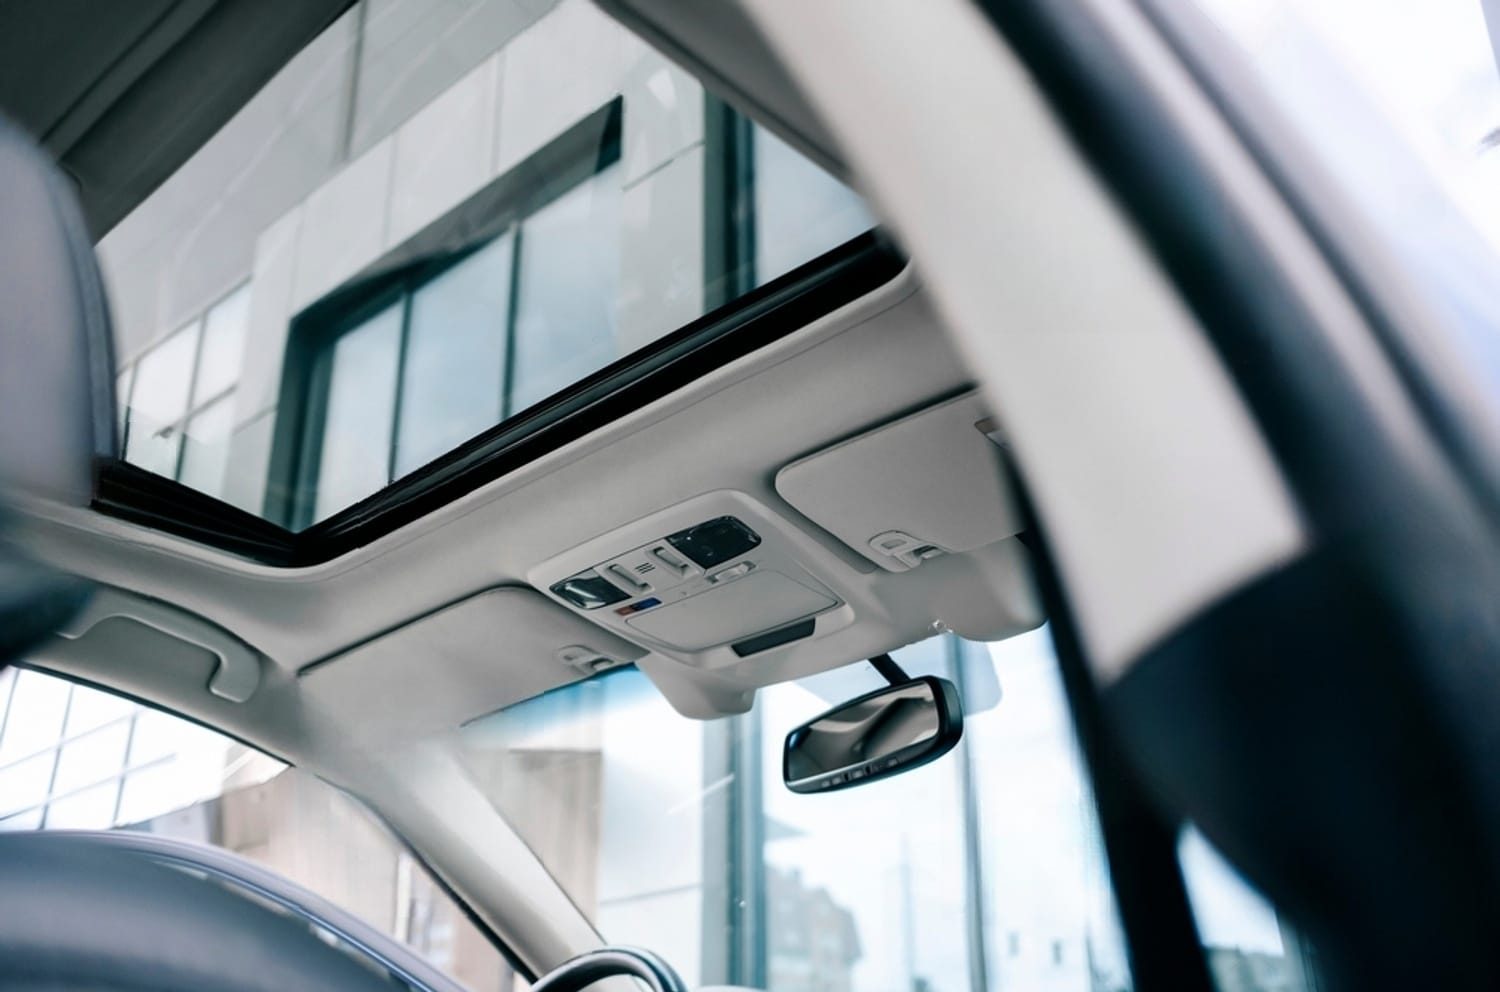 stock-photo-a-panoramic-roof-in-the-car-2215052667-transformed